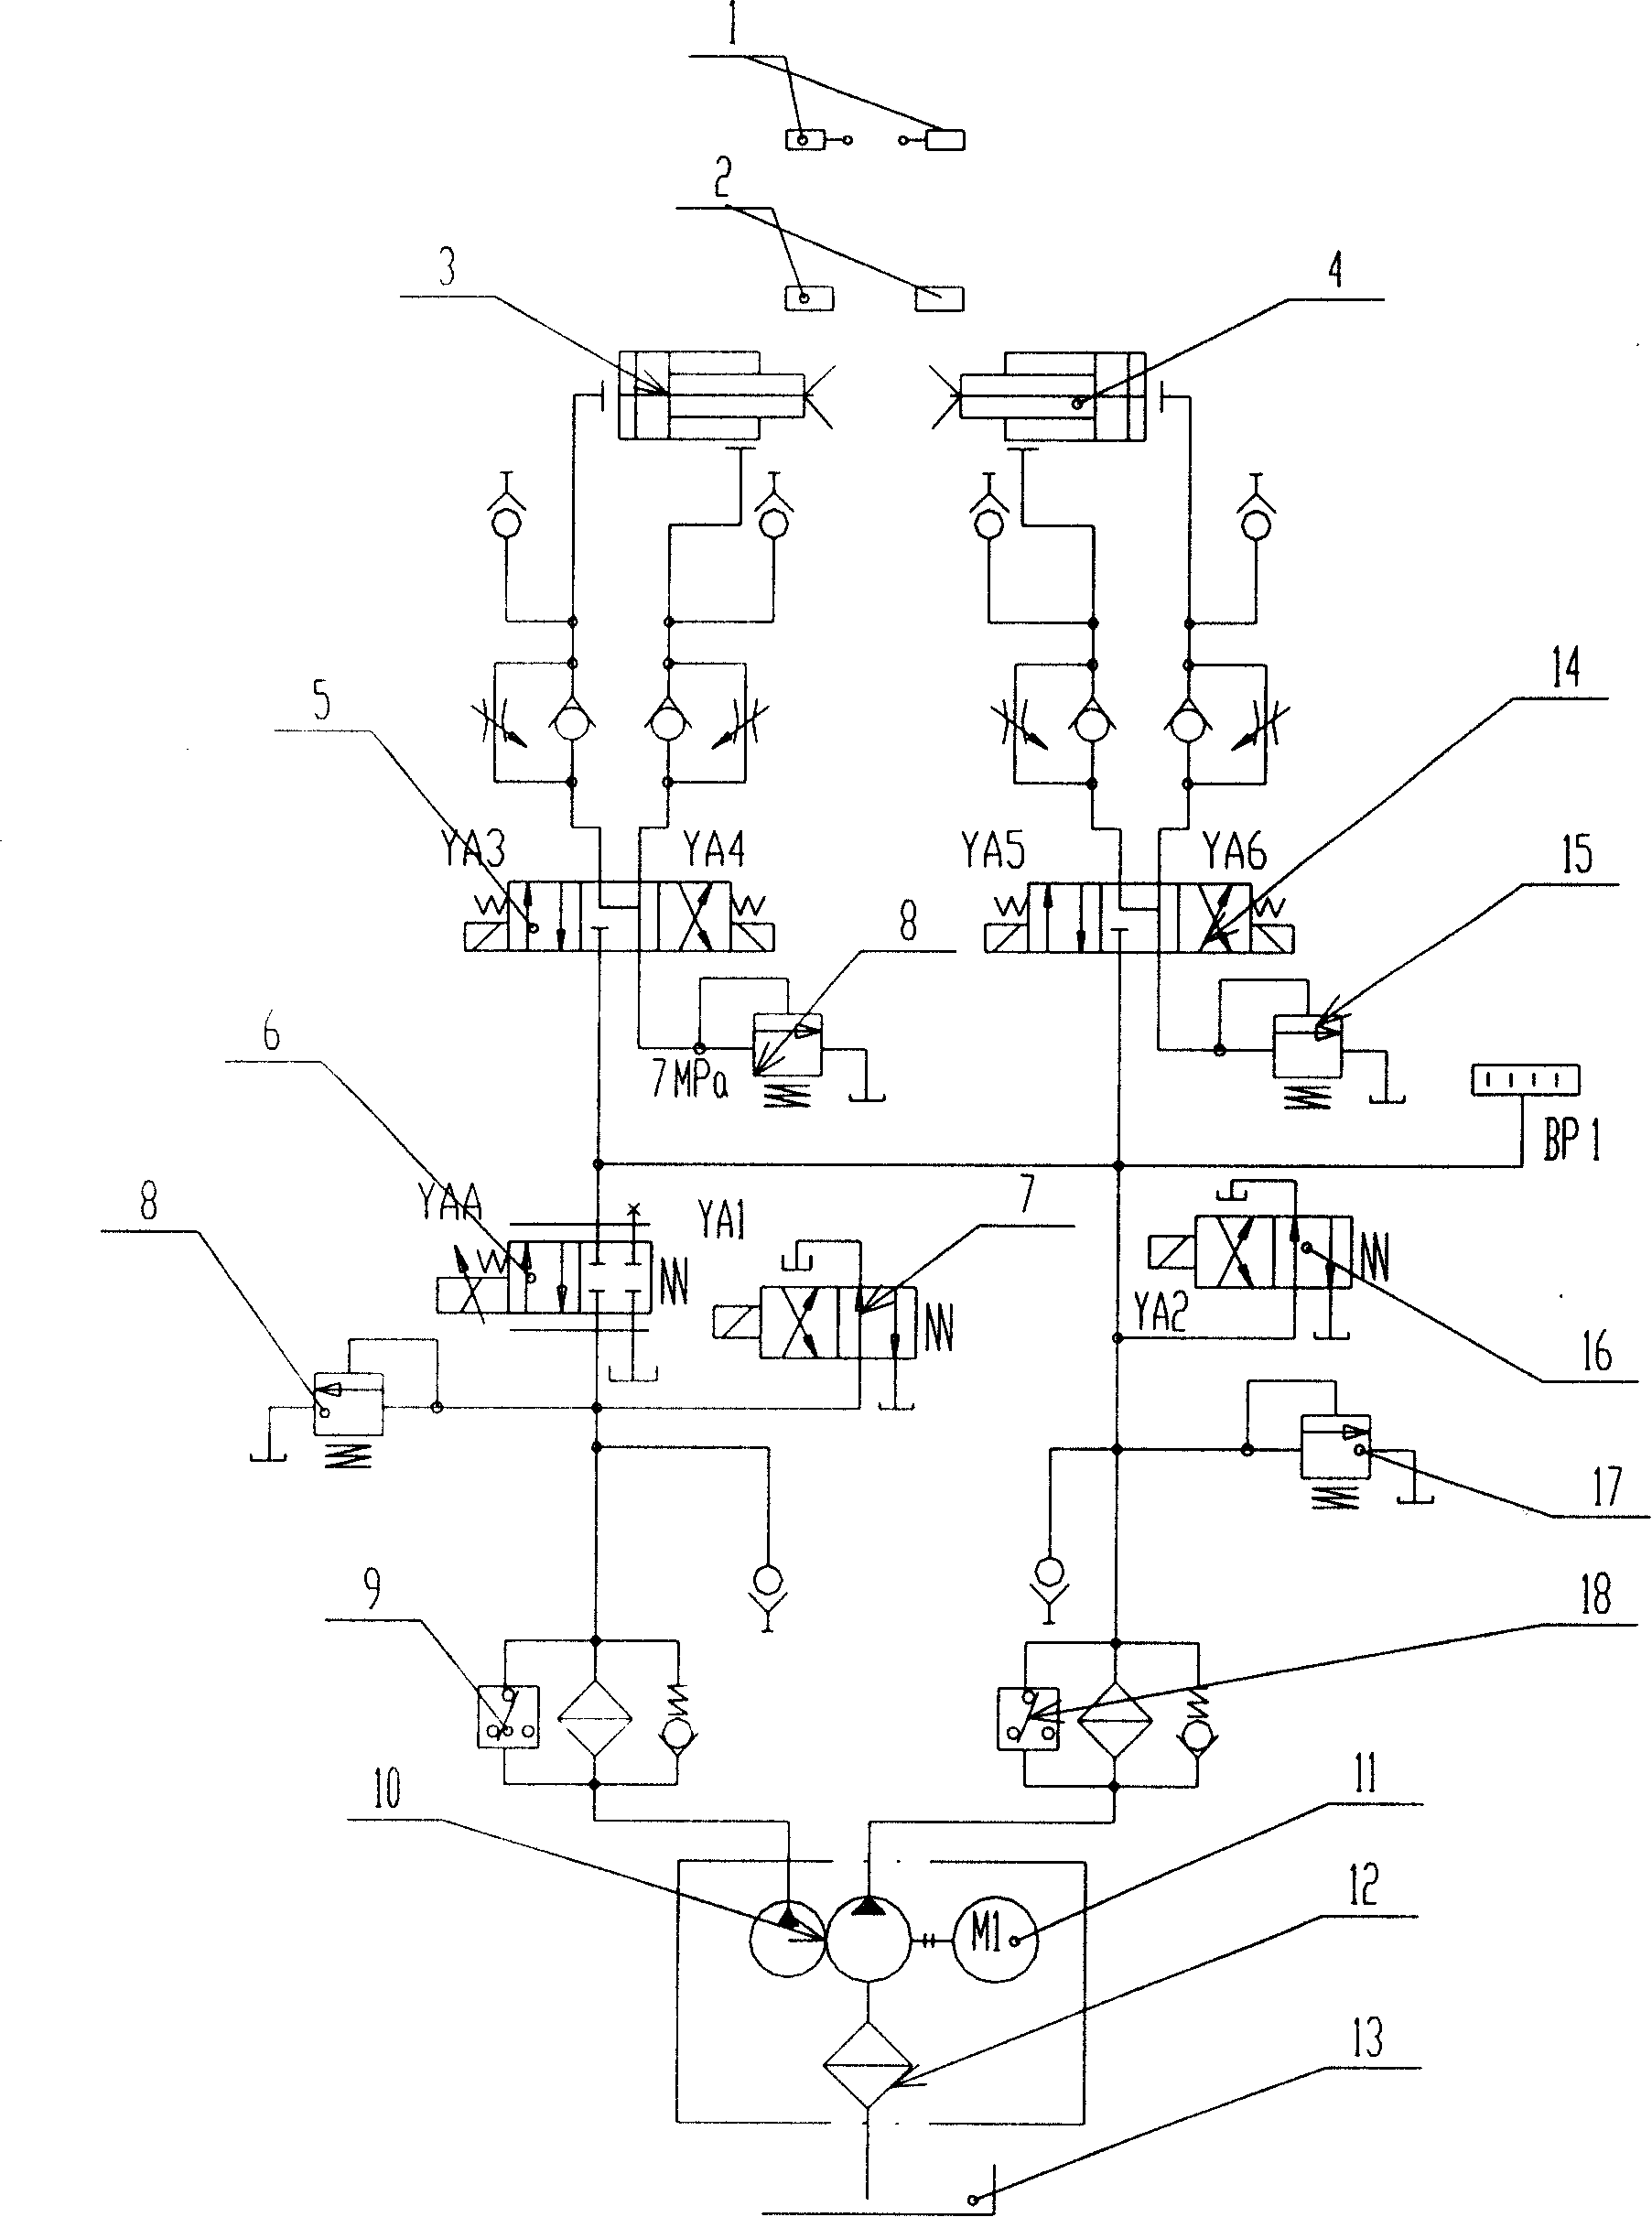 Numerically-controlled forging hydraulic press capable of realizing workpiece automatic centering